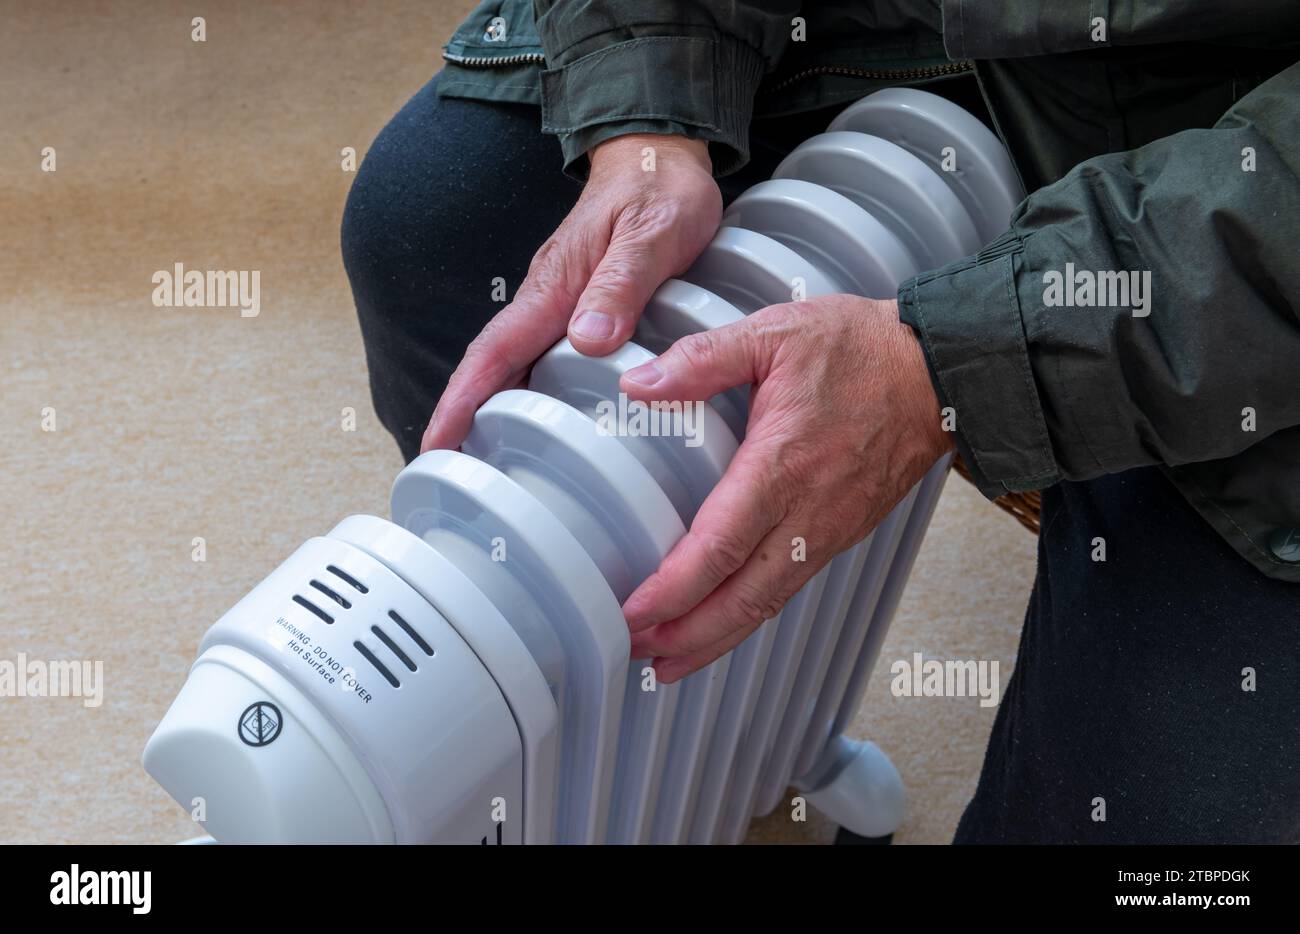 A person sitting in a room hugging a portable electric heater trying to keep warm in the Winter cold. Stock Photo